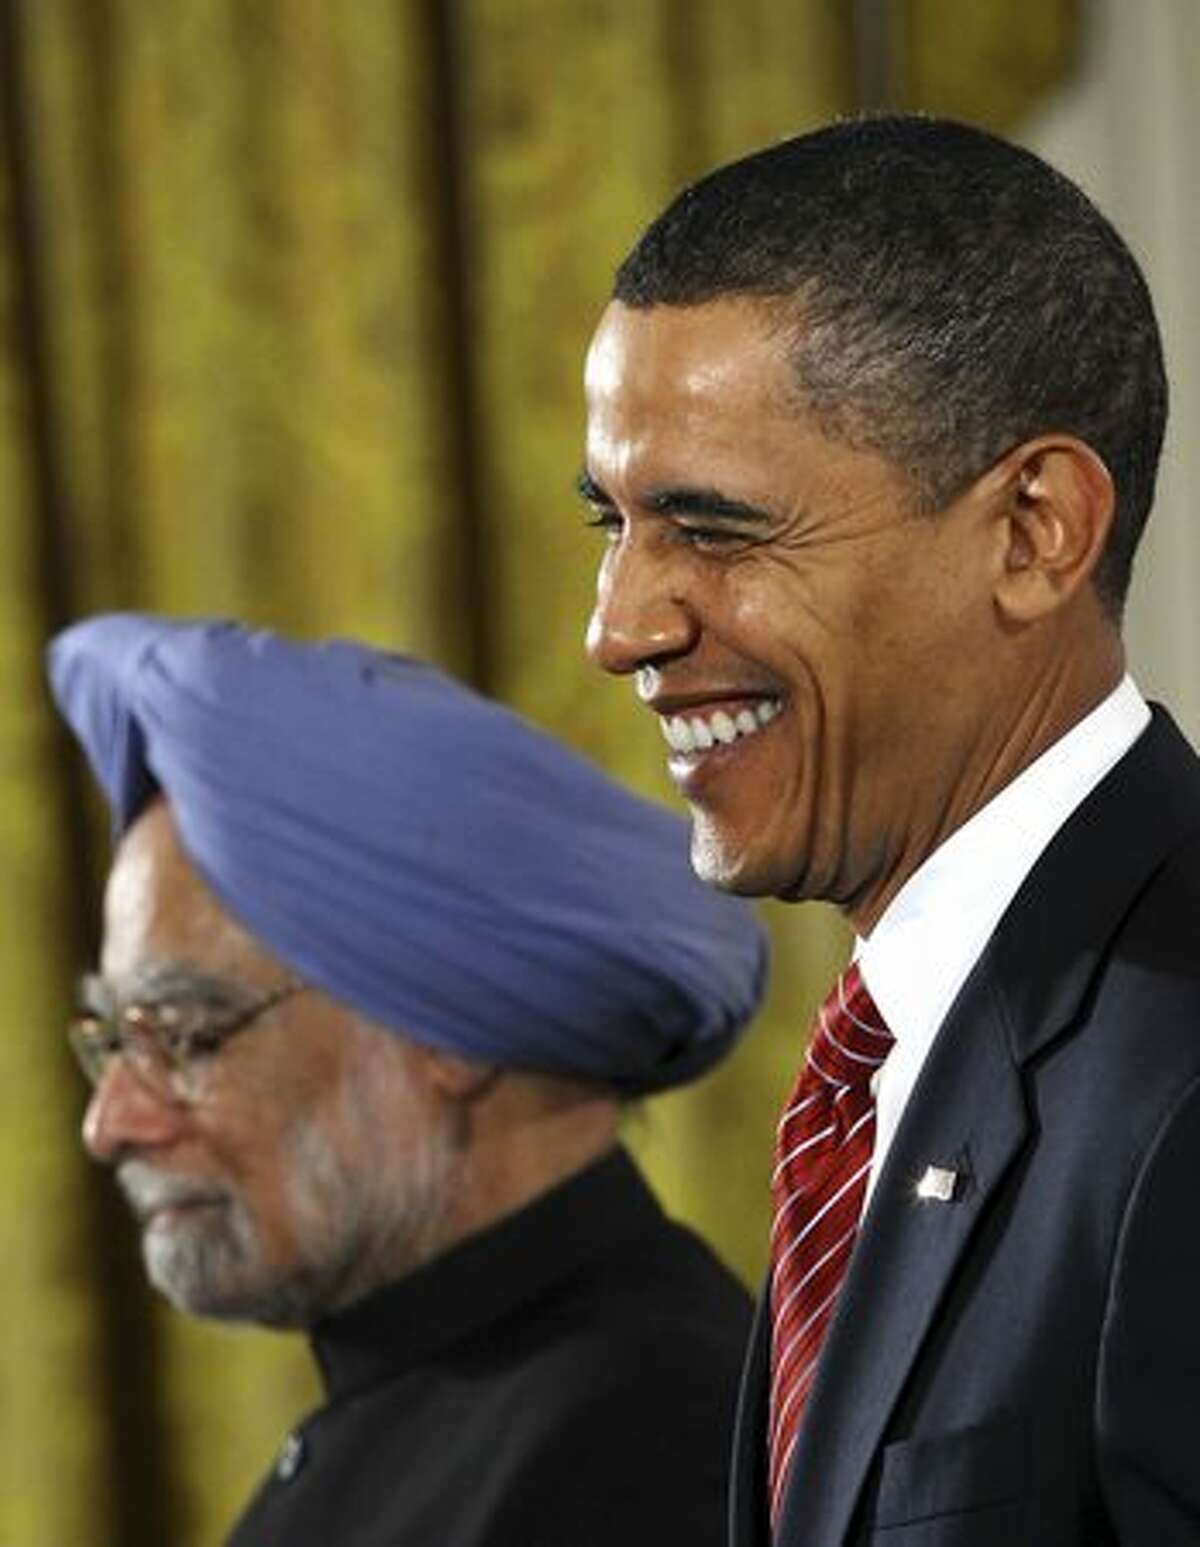 Indian Prime Minister Manmohan Singh and U.S. President Barack Obama participate in a joint press conference in the East Room of the White House.